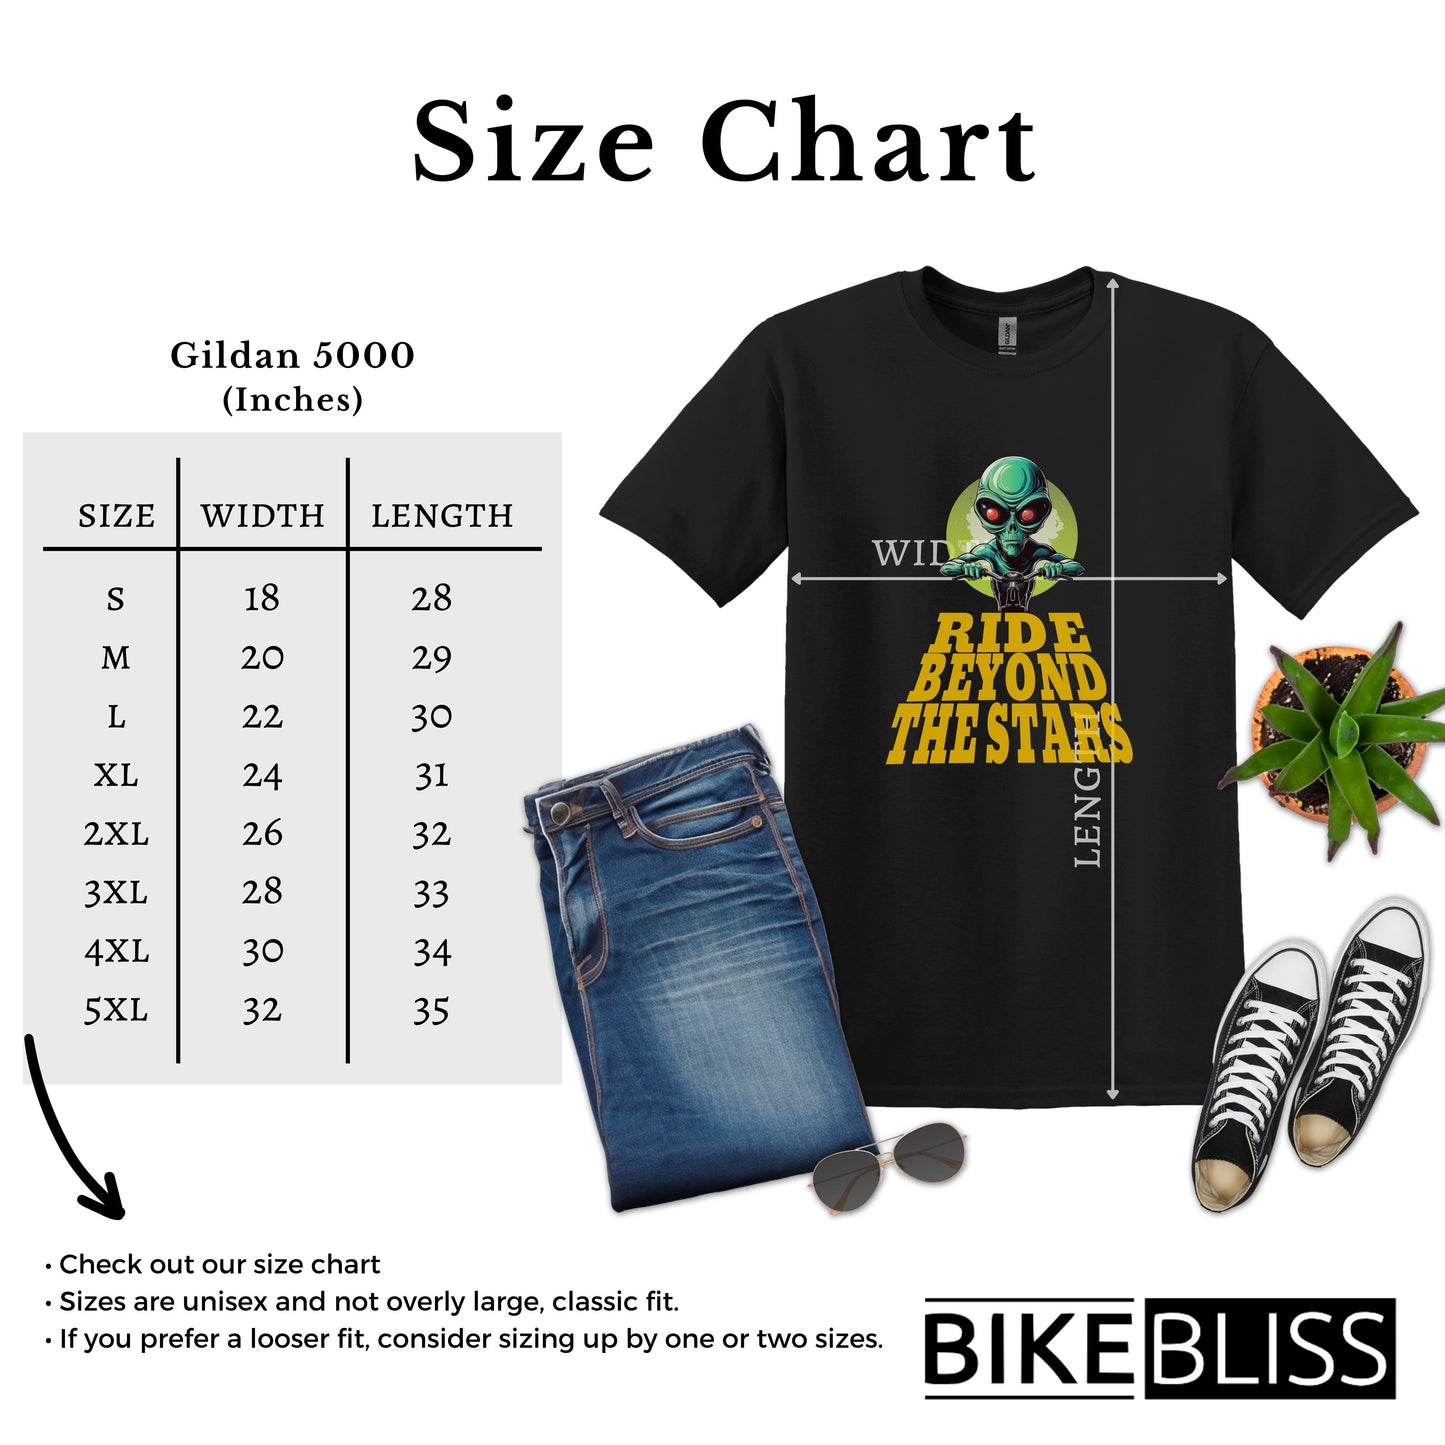 Alien Ride Beyond the Stars Bicycle T-Shirt